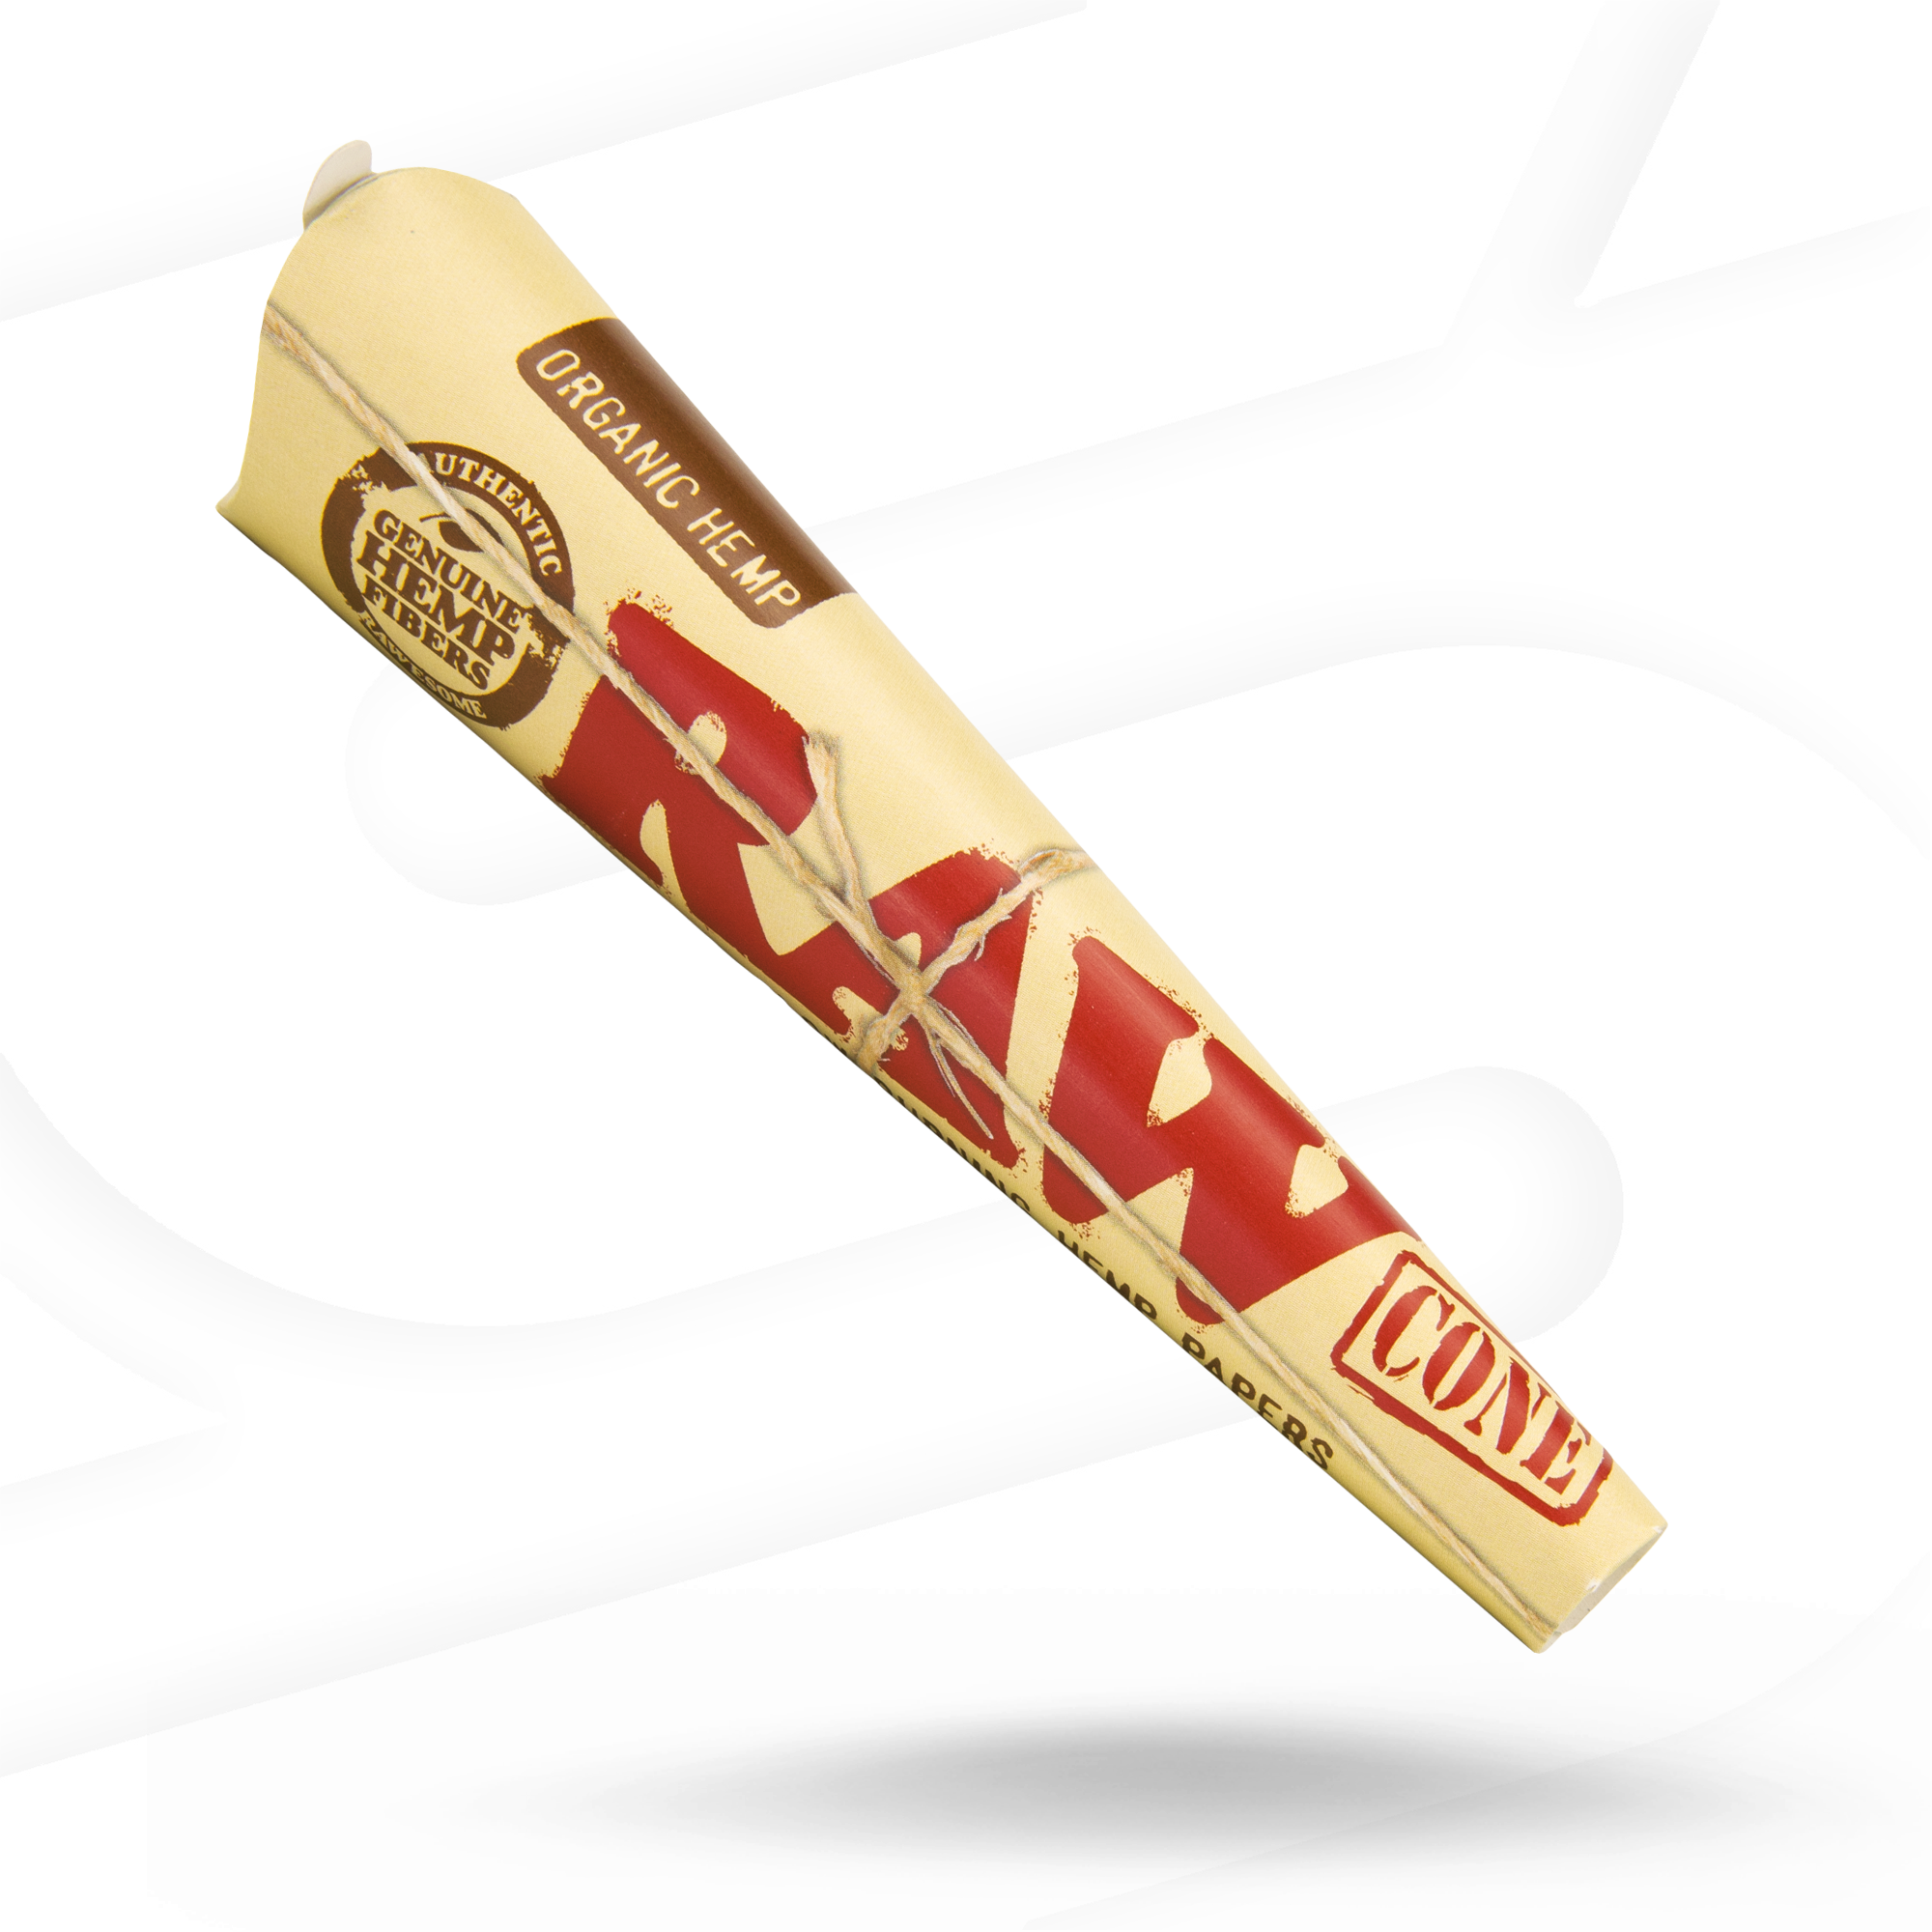 RAW Organic 1 1/4 Cones - 6 Pack RAW Cones RAWB-CNOH-1402_1/32 esd-official